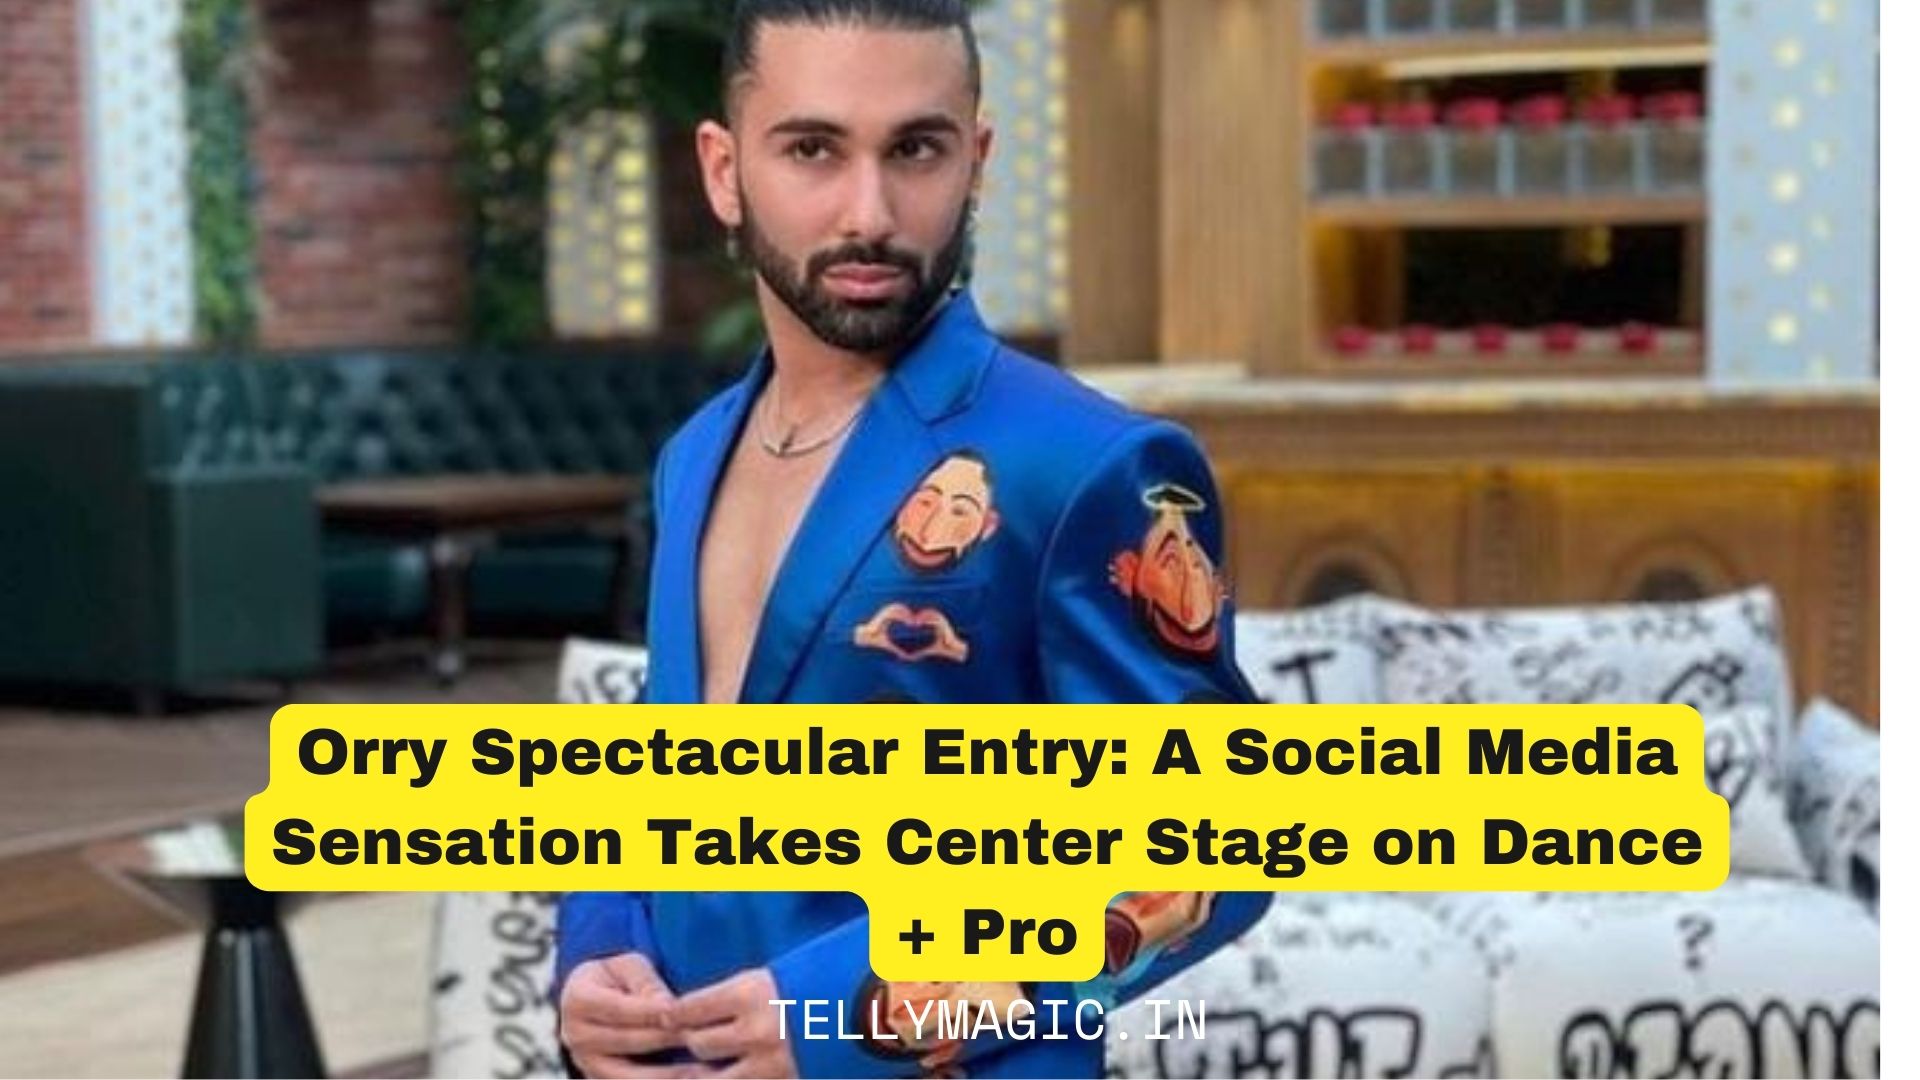 Orry Spectacular Entry: A Social Media Sensation Takes Center Stage on Dance + Pro